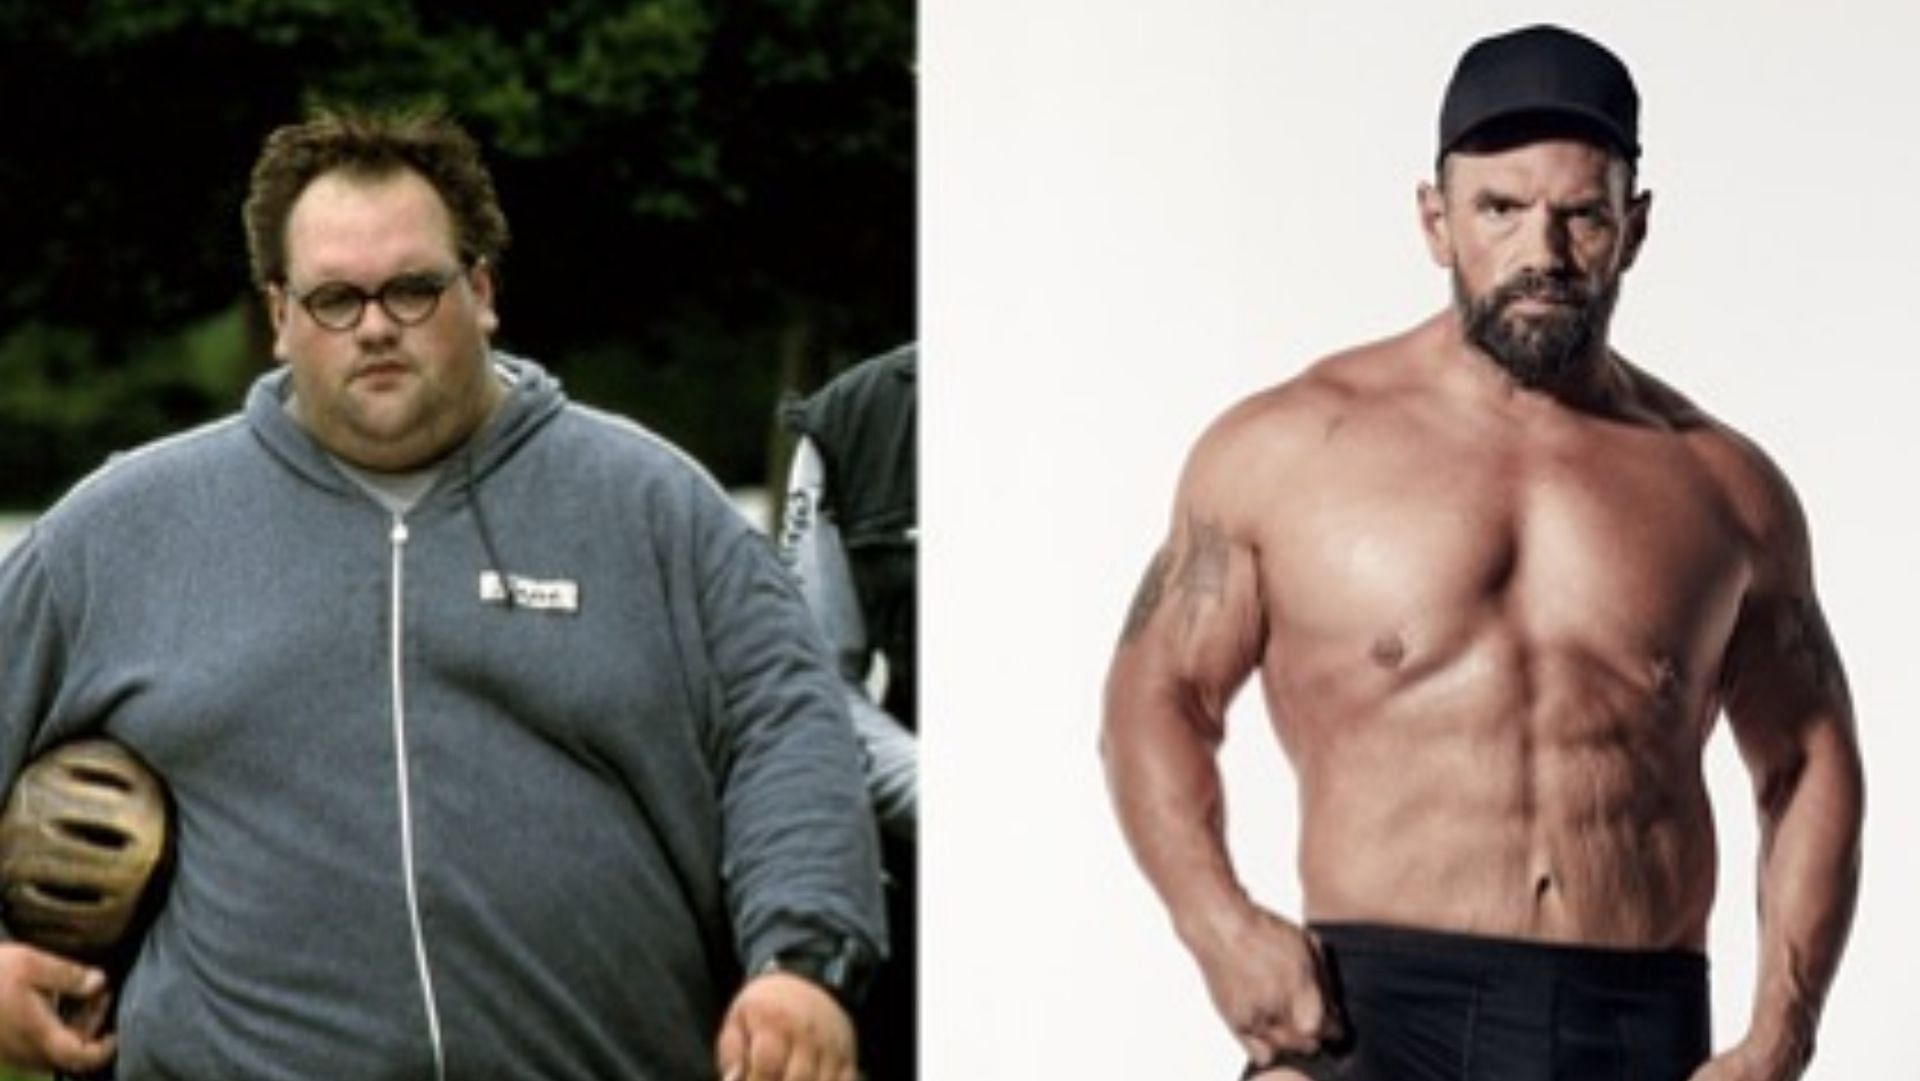 Ethan Suplees Weight Loss Journey From Over 500 Pounds To Ripped